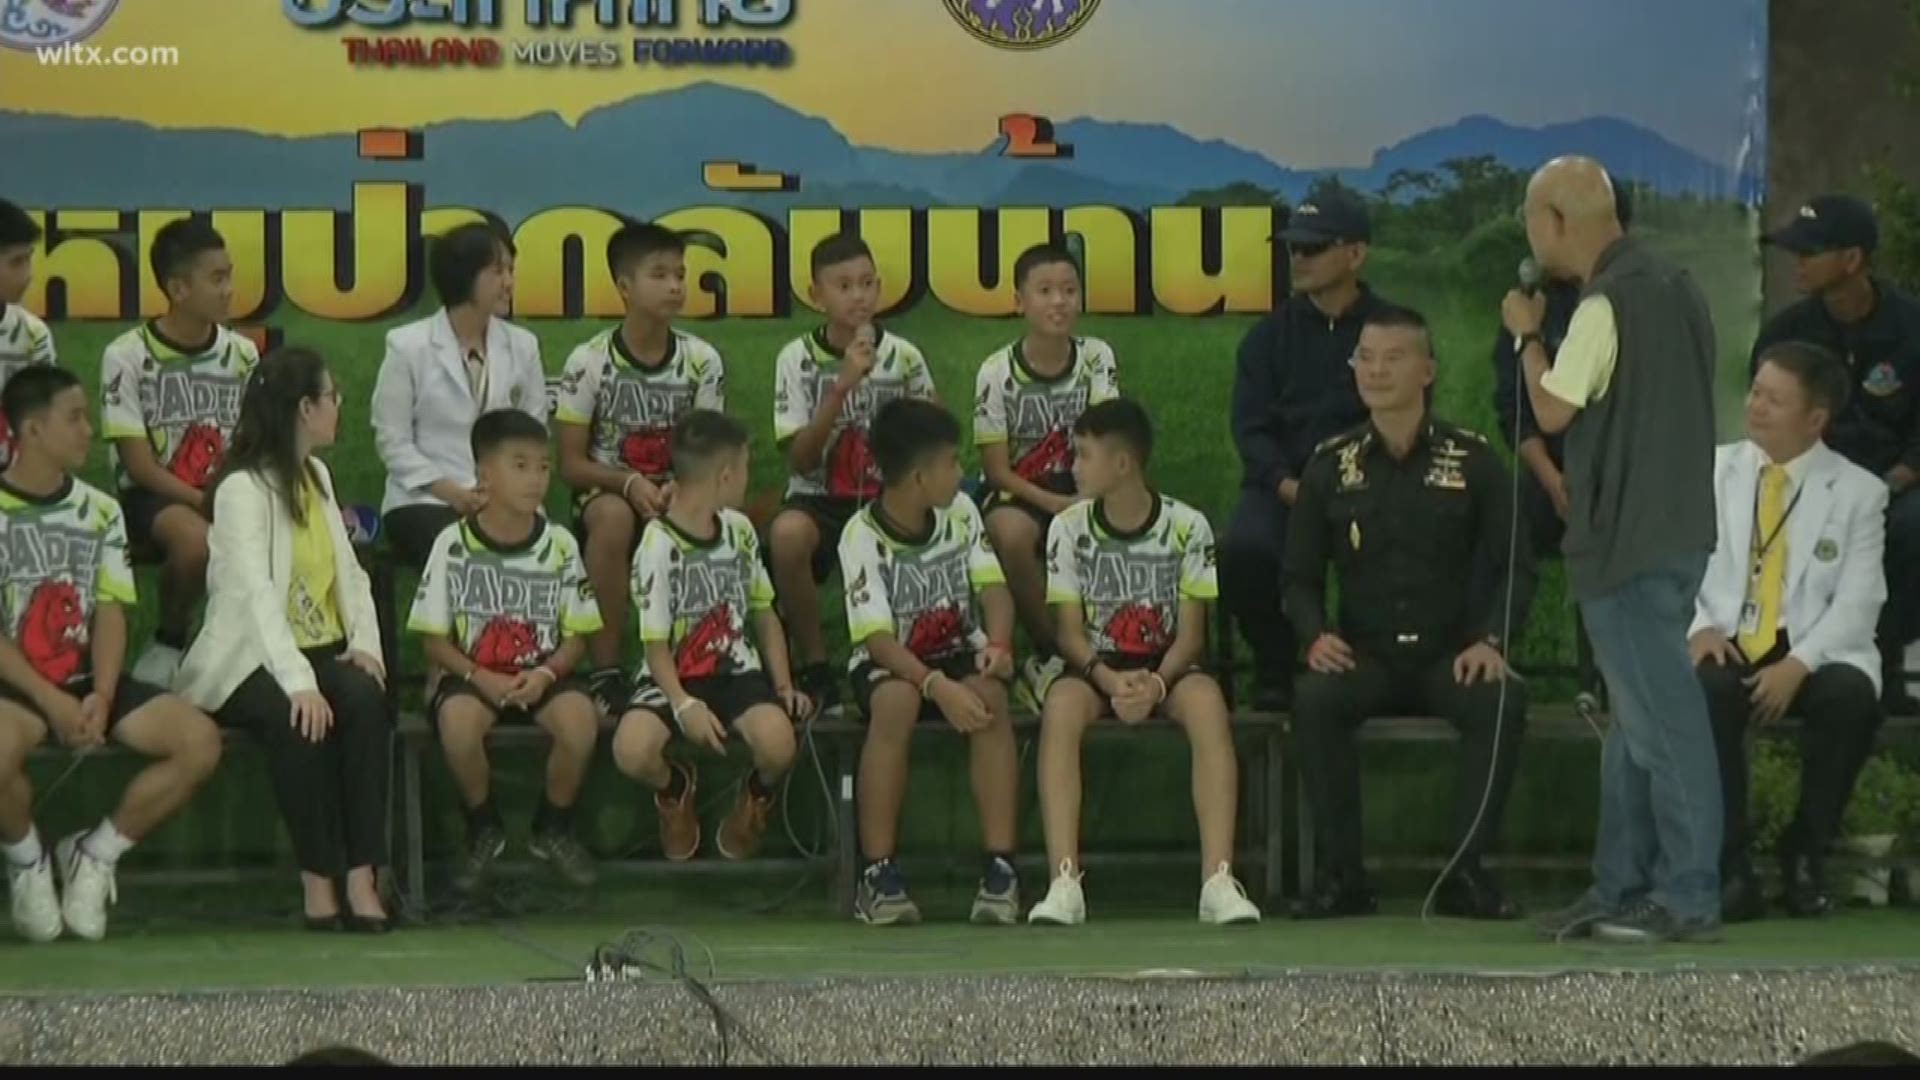 The boys soccer team made their first appearance since they were rescued last week from a cave in Thailand.